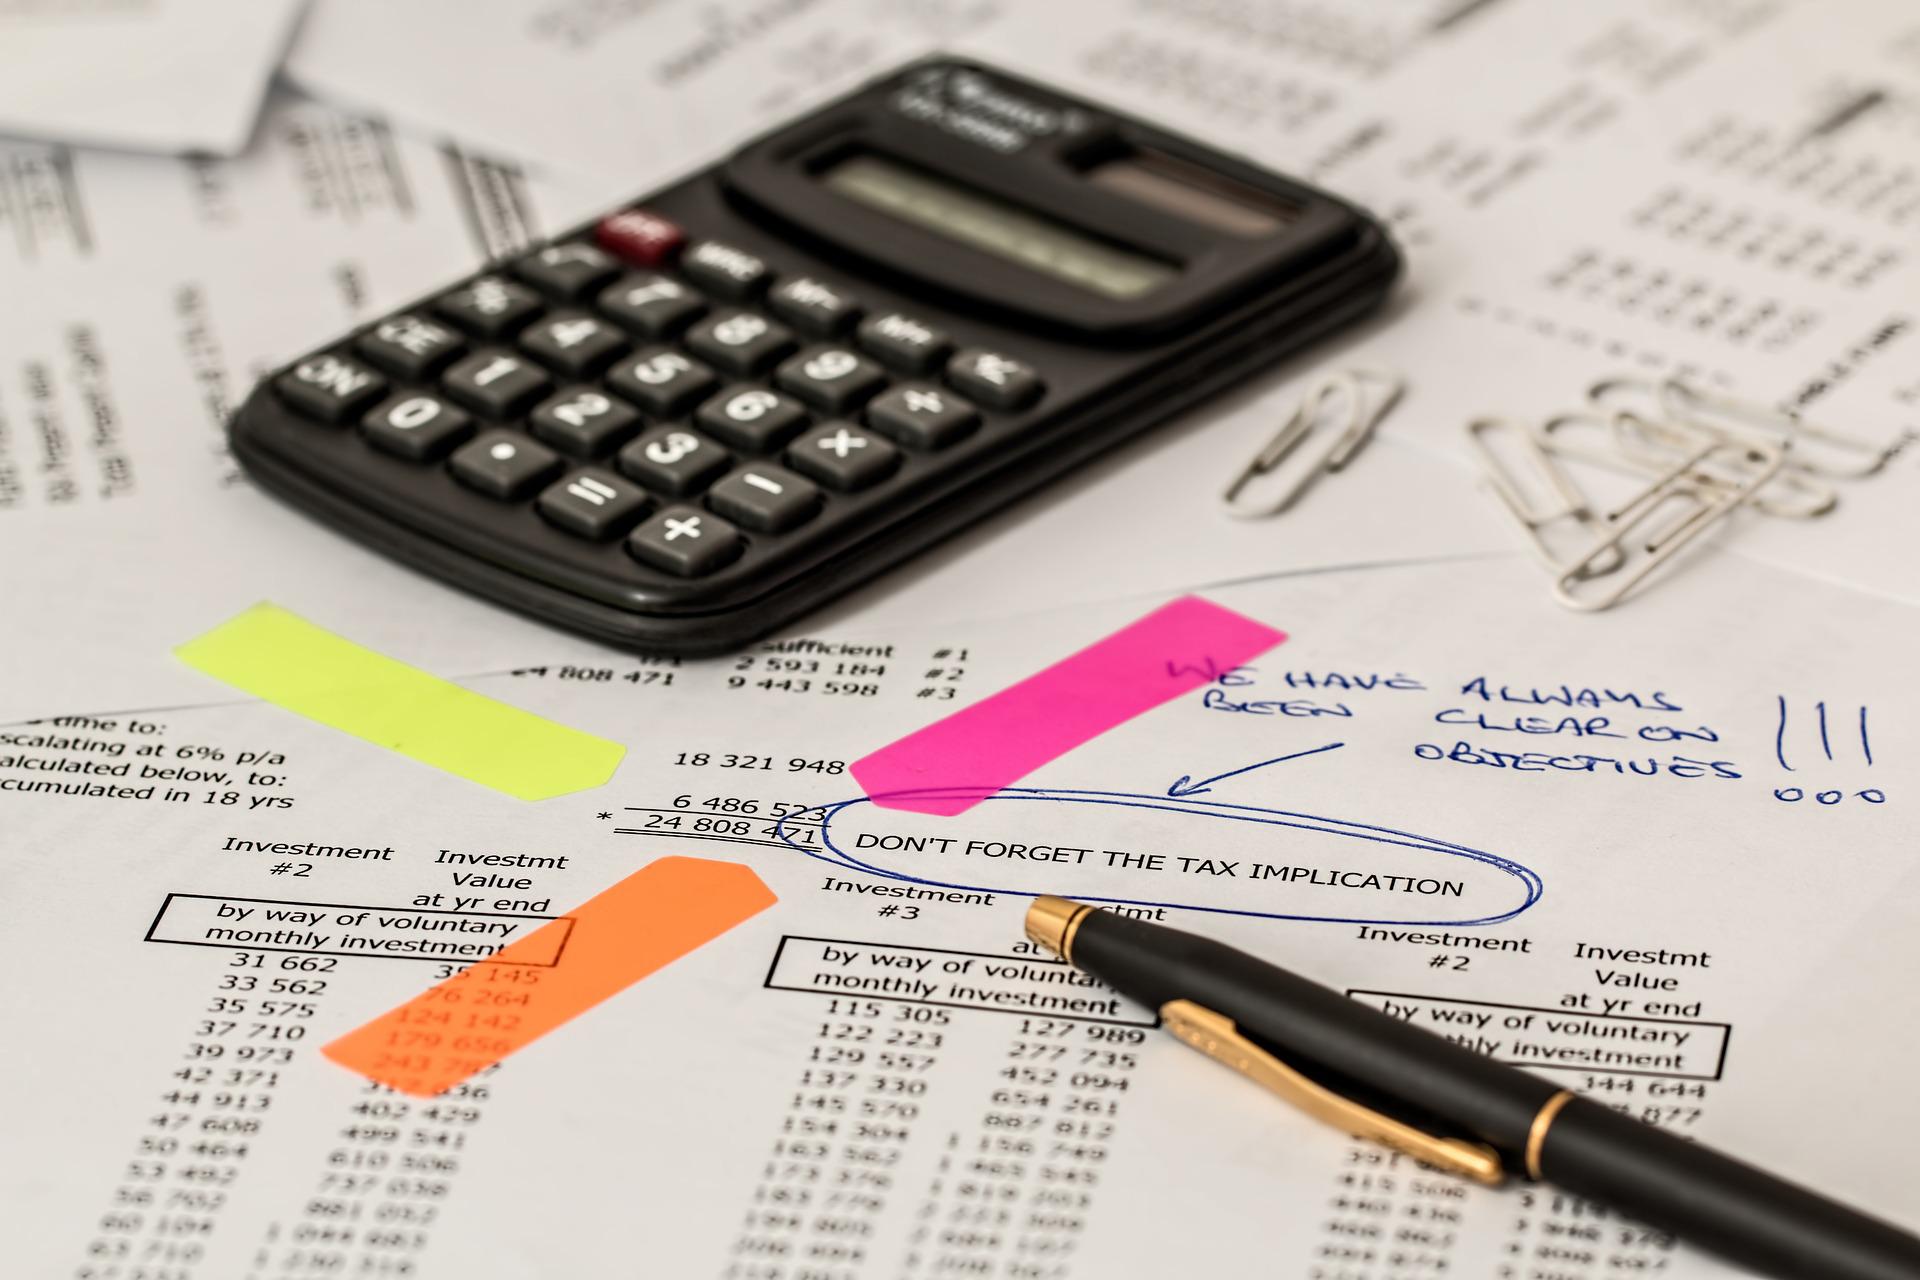 Calculator laying on tax preparation papers used by accountants and financial institutions